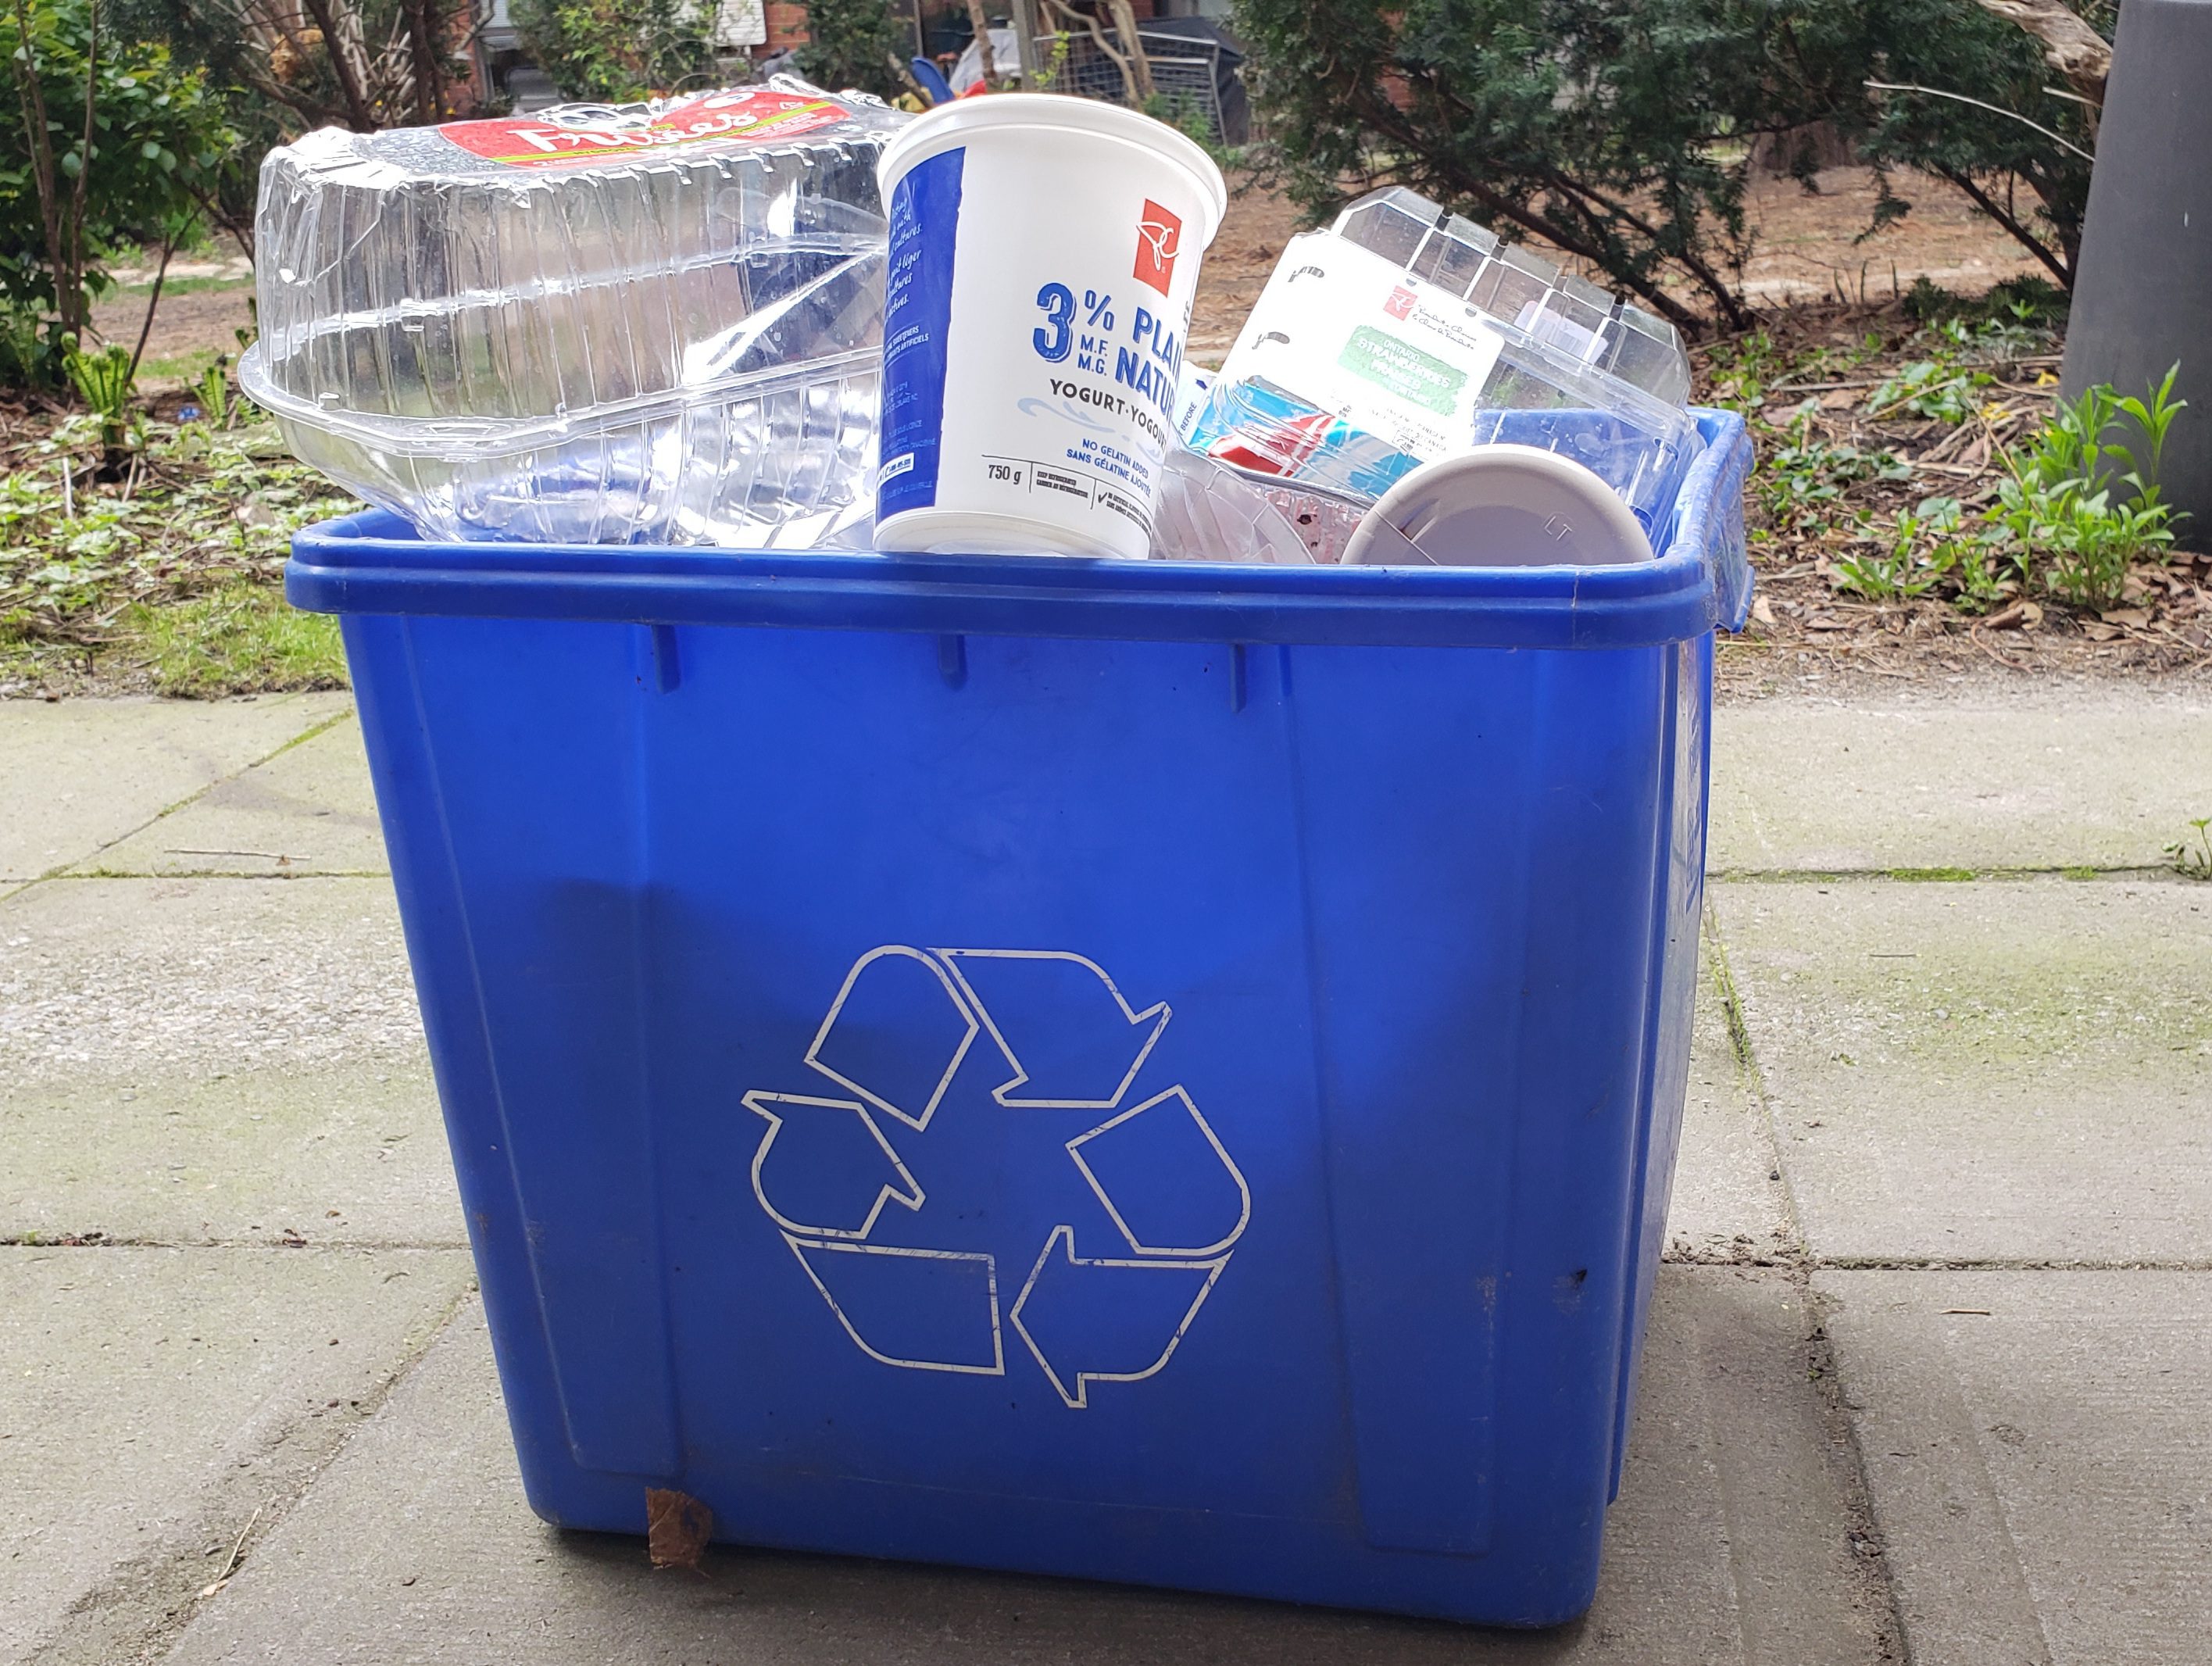 A recycling bin overflowing with plastic packaging.